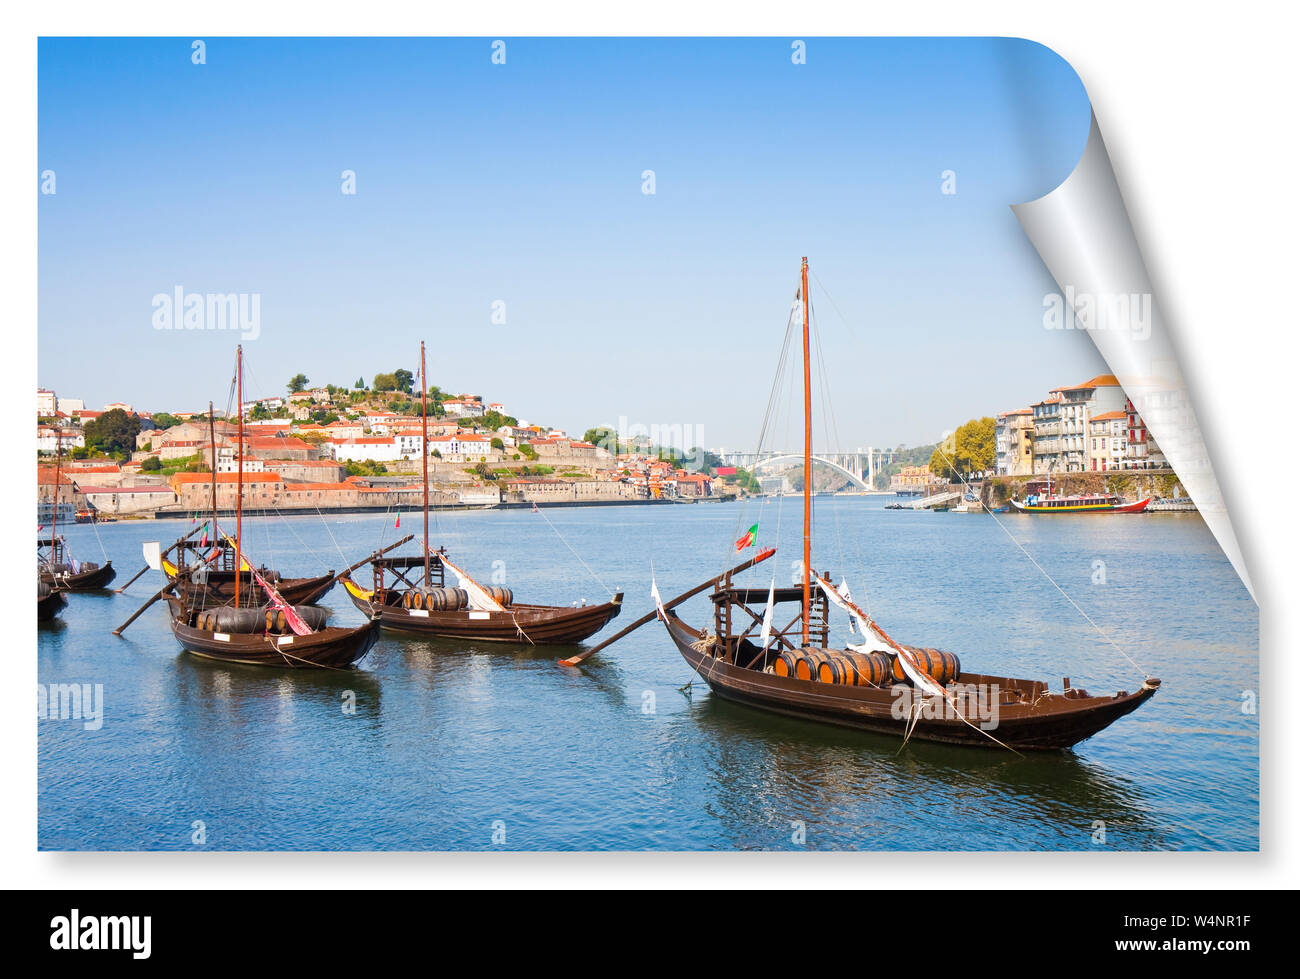 Typical portuguese wooden boats, called barcos rabelos, used in the past to transport the famous port wine (Porto-Oporto-Portugal-Europe) - concept im Stock Photo